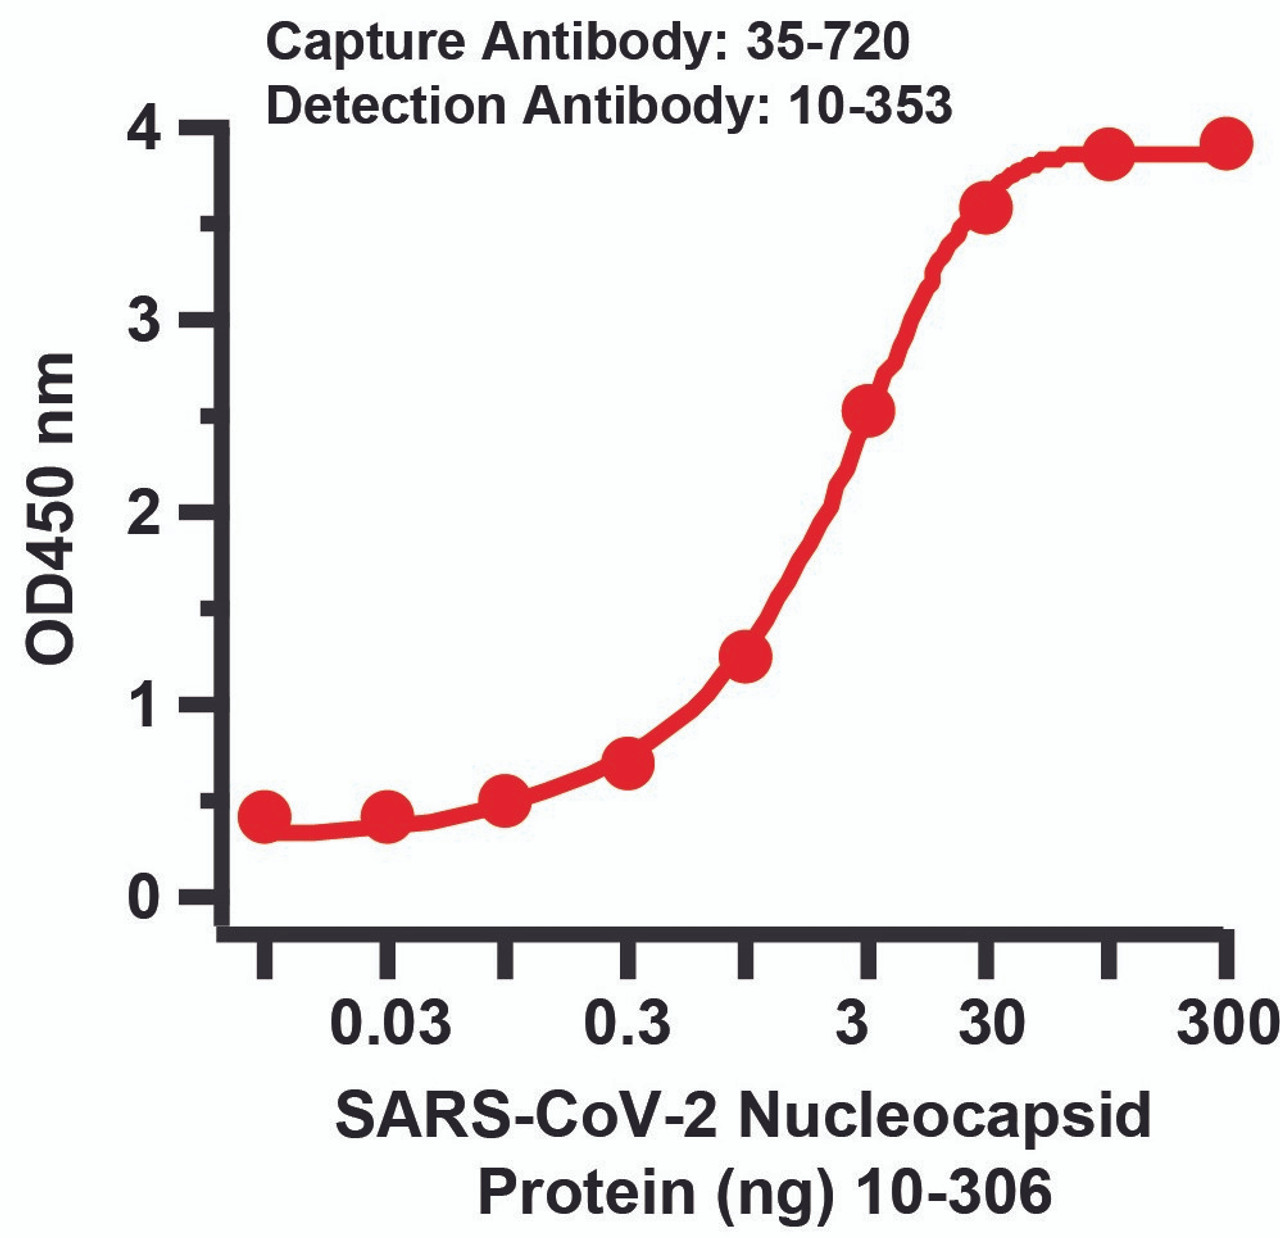 <strong>Figure 2 Sandwich ELISA for SARS-CoV-2 (COVID-19) Matched Pair Nucleocapsid Antibodies</strong><br>
Antibodies: SARS-CoV-2 (COVID-19) Nucleocapsid Antibodies, 35-720 and 10-353. A sandwich ELISA was performed using SARS-CoV-2 Nucleocapsid antibody (35-720, 2ug/ml) as capture antibody, the Nucleocapsid recombinant protein as the binding protein (10-306) , and the anti-SARS-CoV-2 Nucleocapsid antibody (10-353, 0.1ug/ml) as the detection antibody. Secondary: Goat anti-rabbit IgG HRP conjugate at 1:20000 dilution. Detection range is from 0.03 ng to 300 ng. EC50 = 6.9 ng